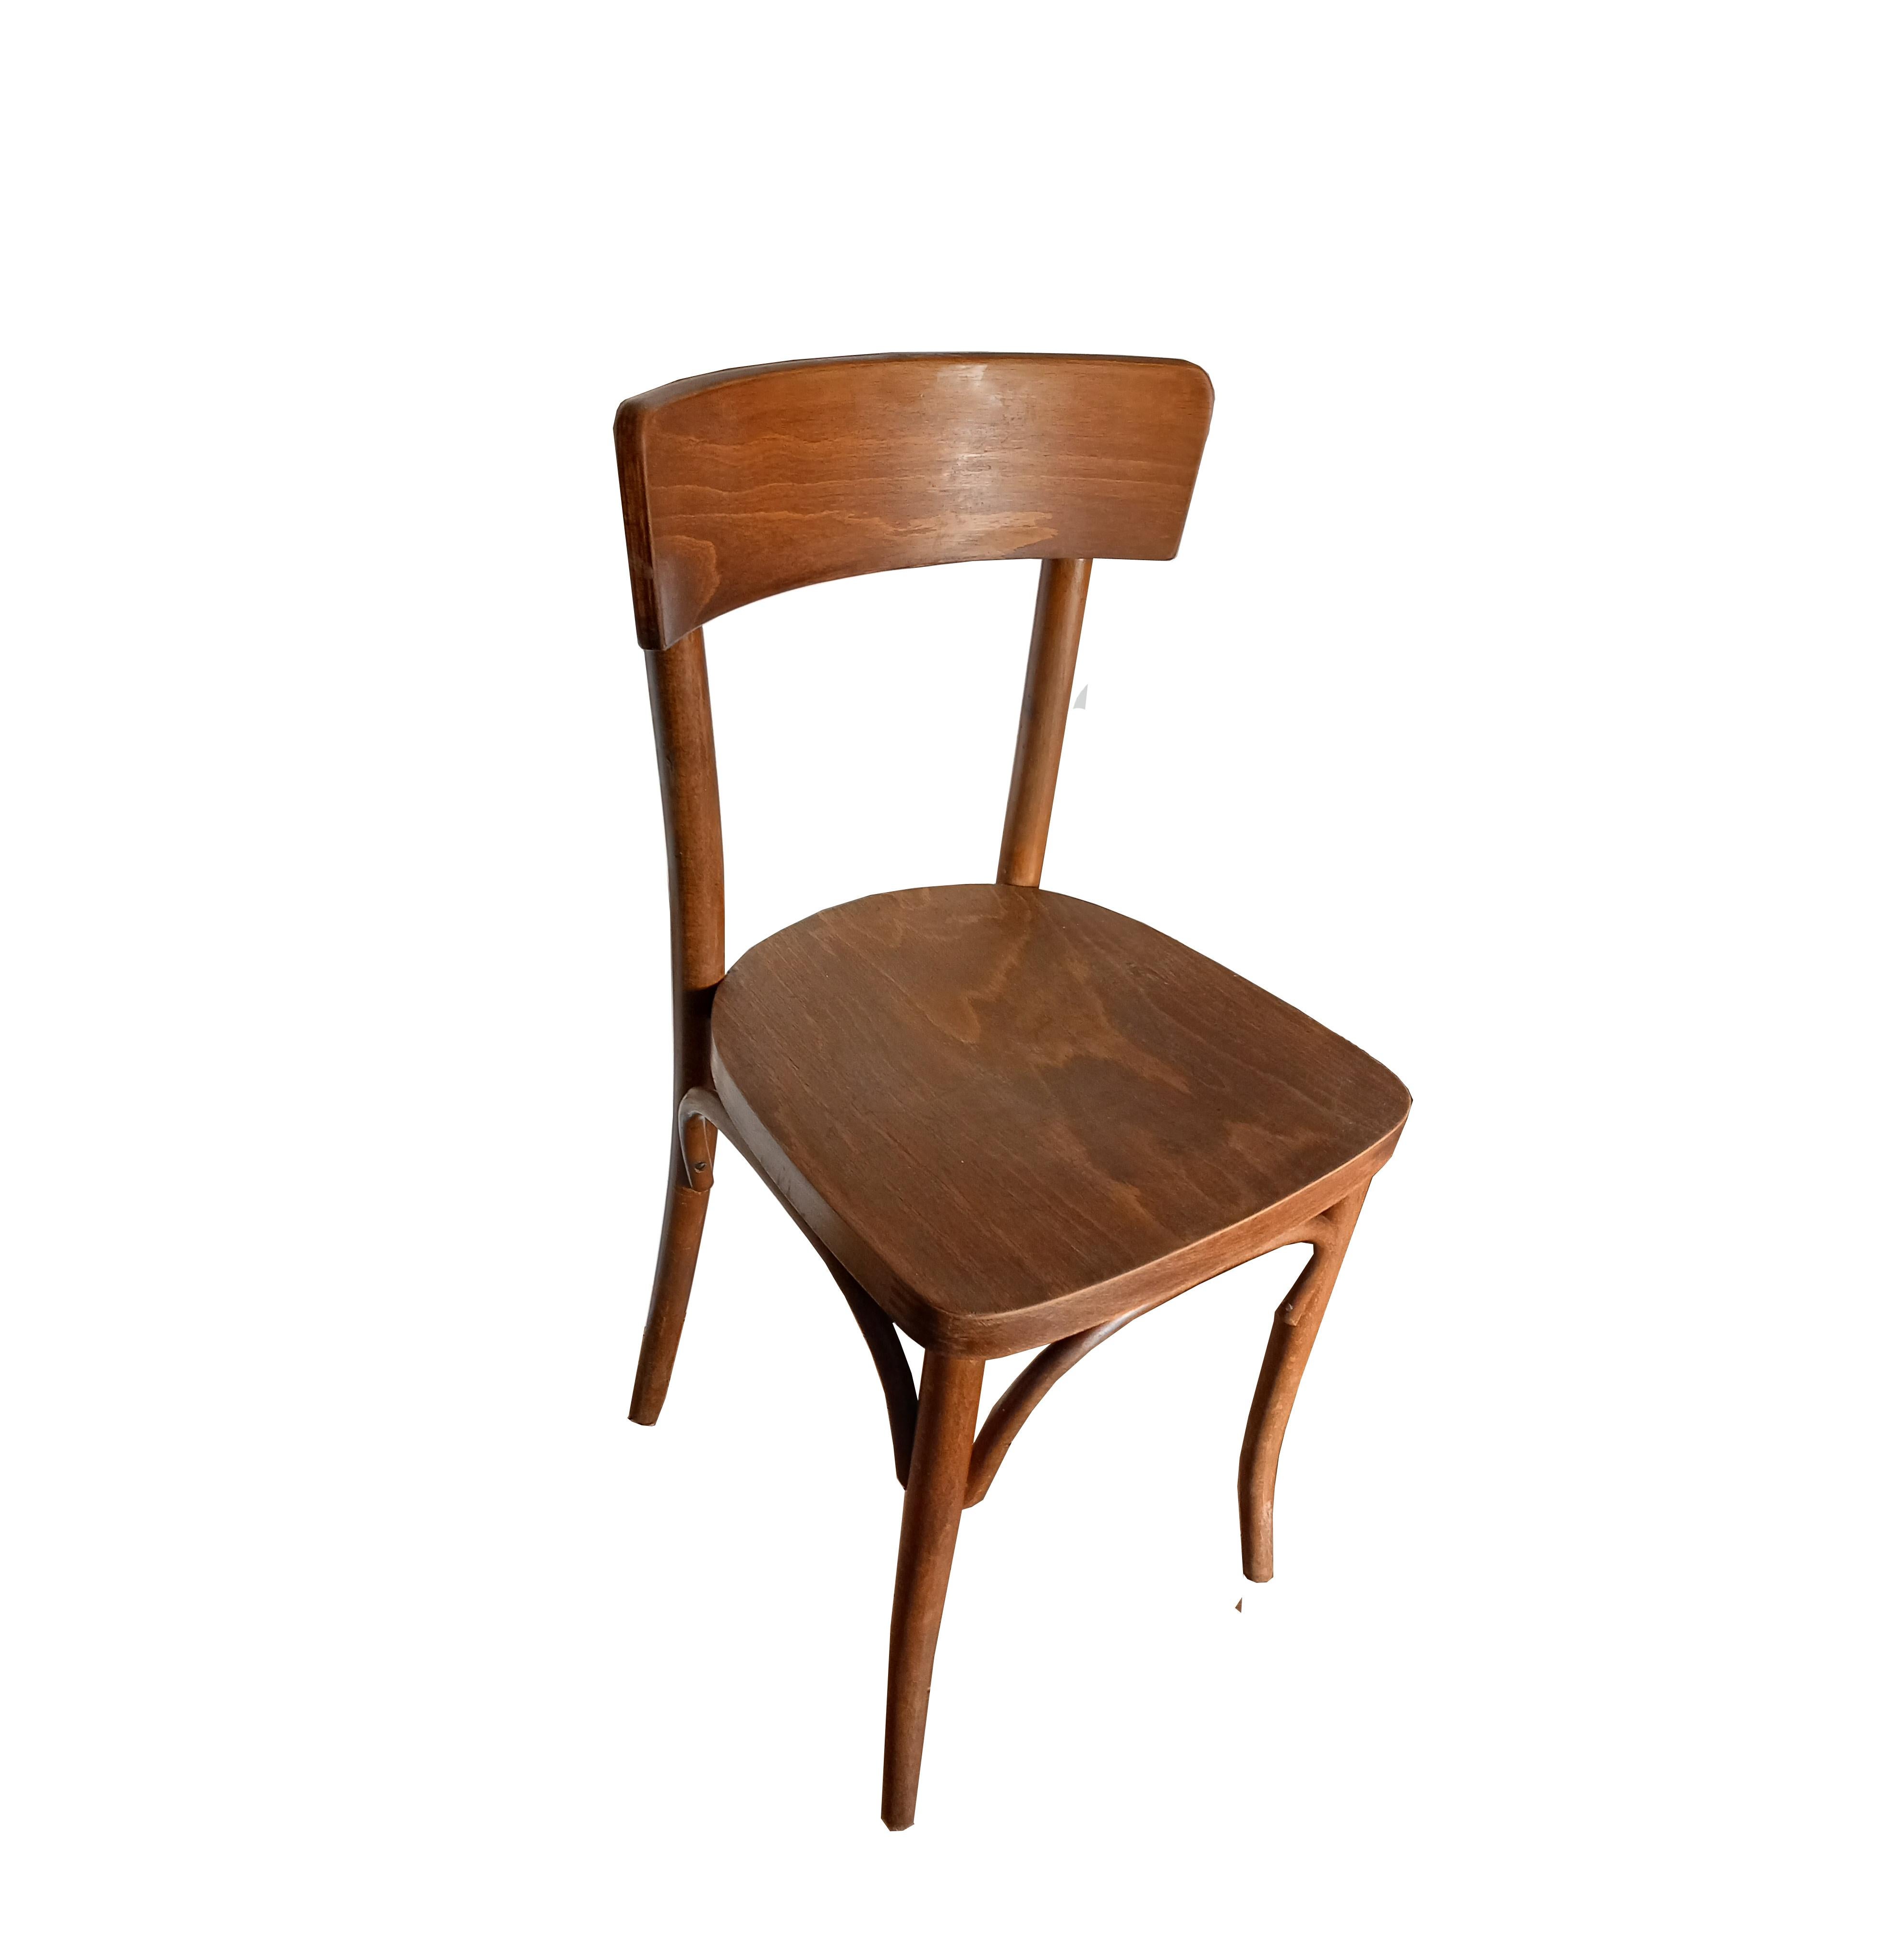 Other August Thonet Chairs, Set of 6, Czech Republic, 50s Signed Thonet For Sale